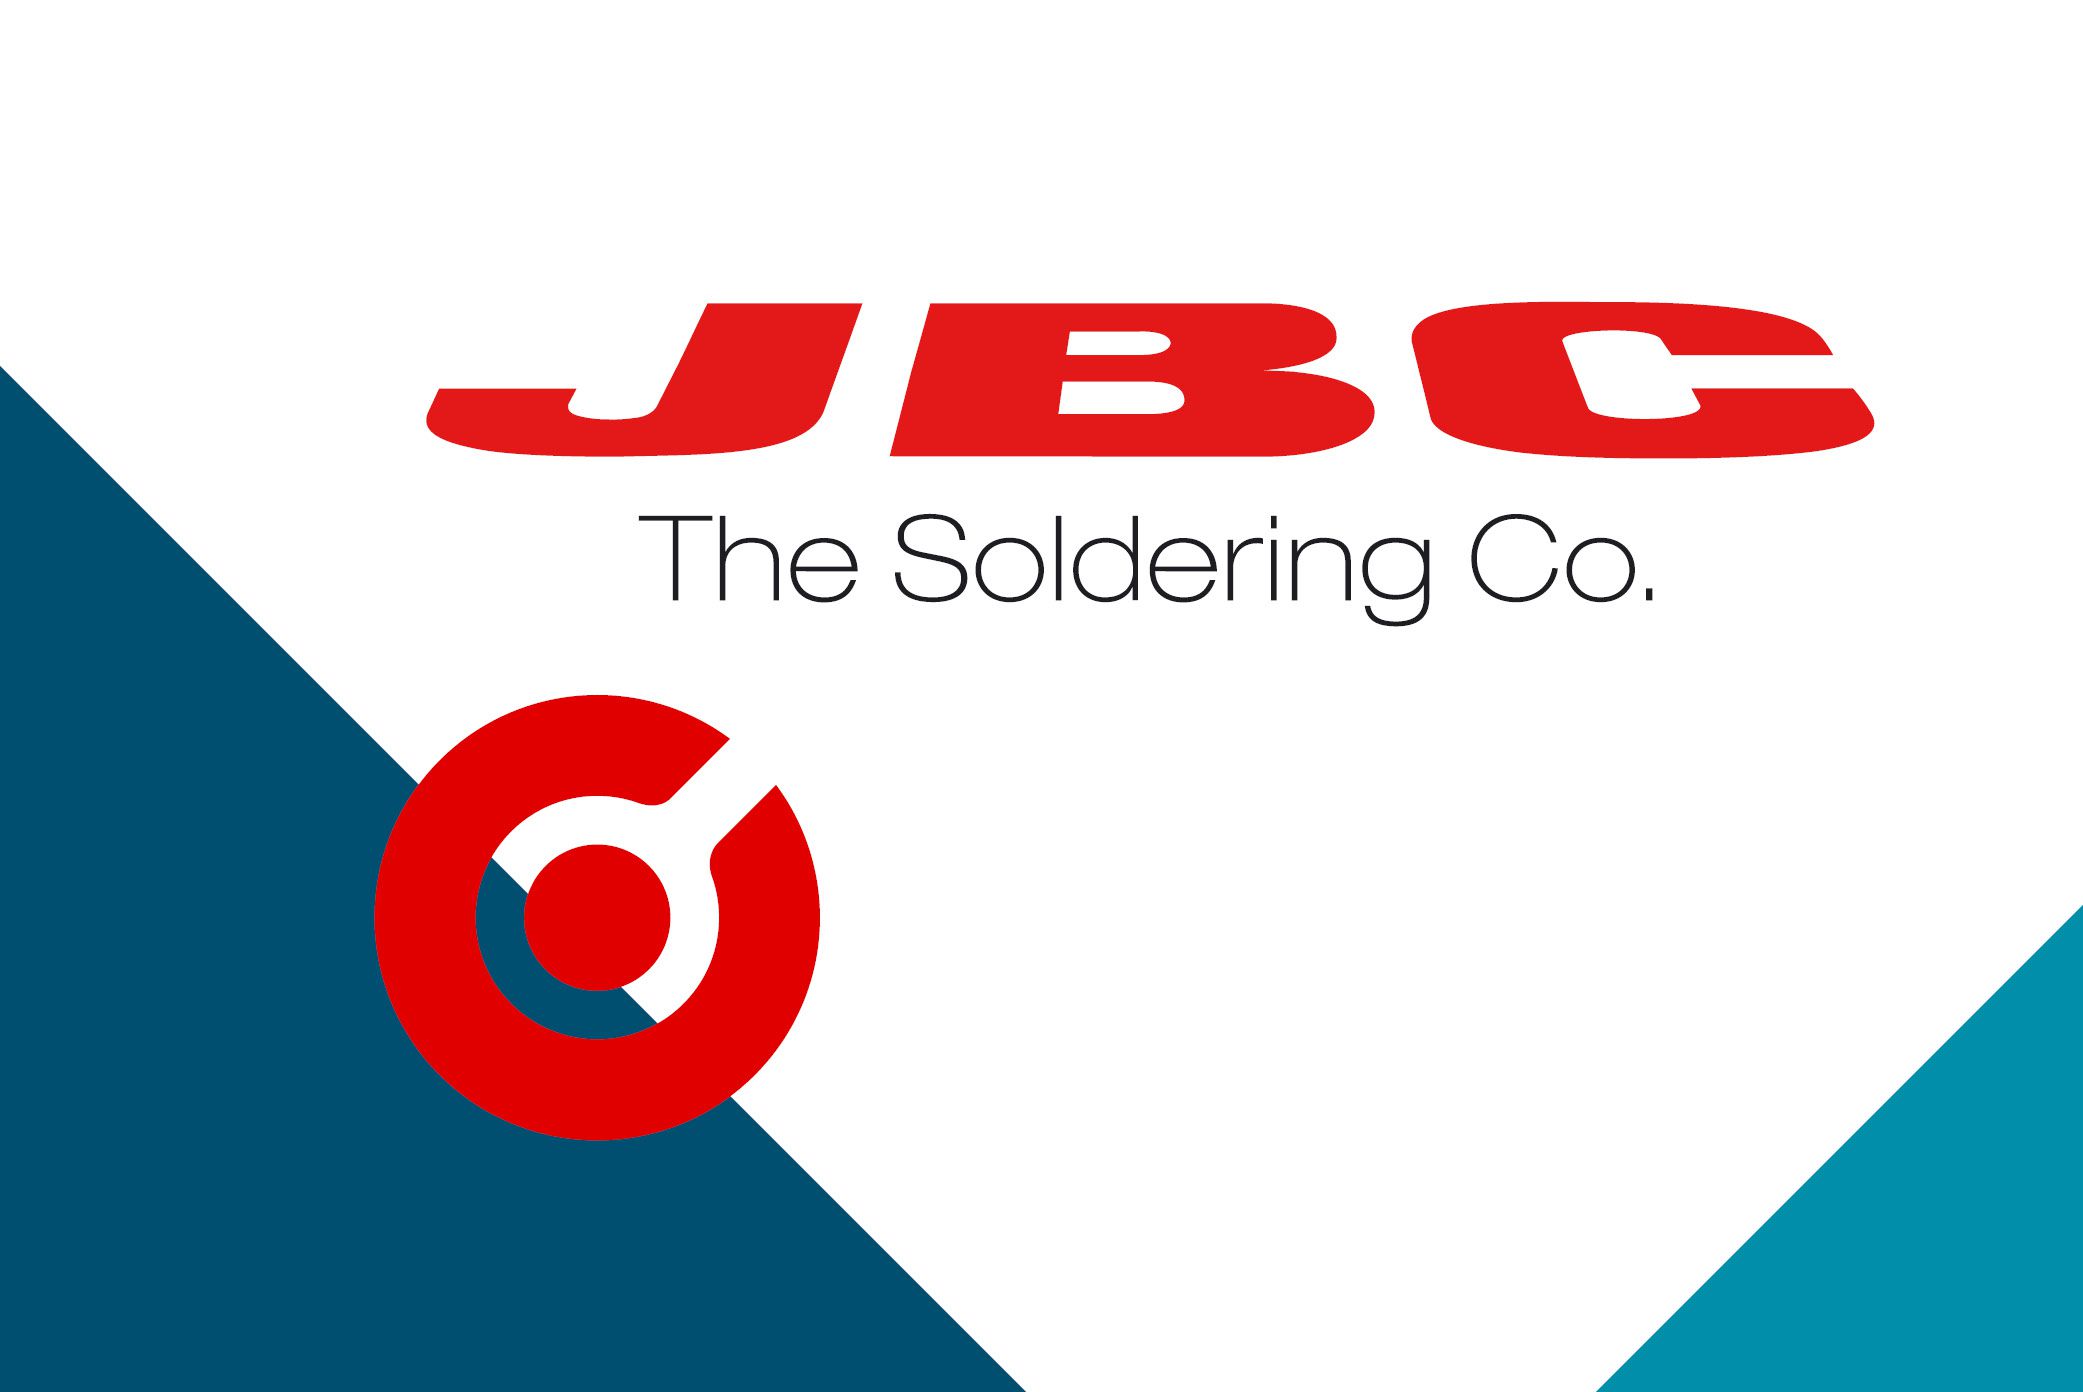 CORE-emt offers JBC soldering stations and tips